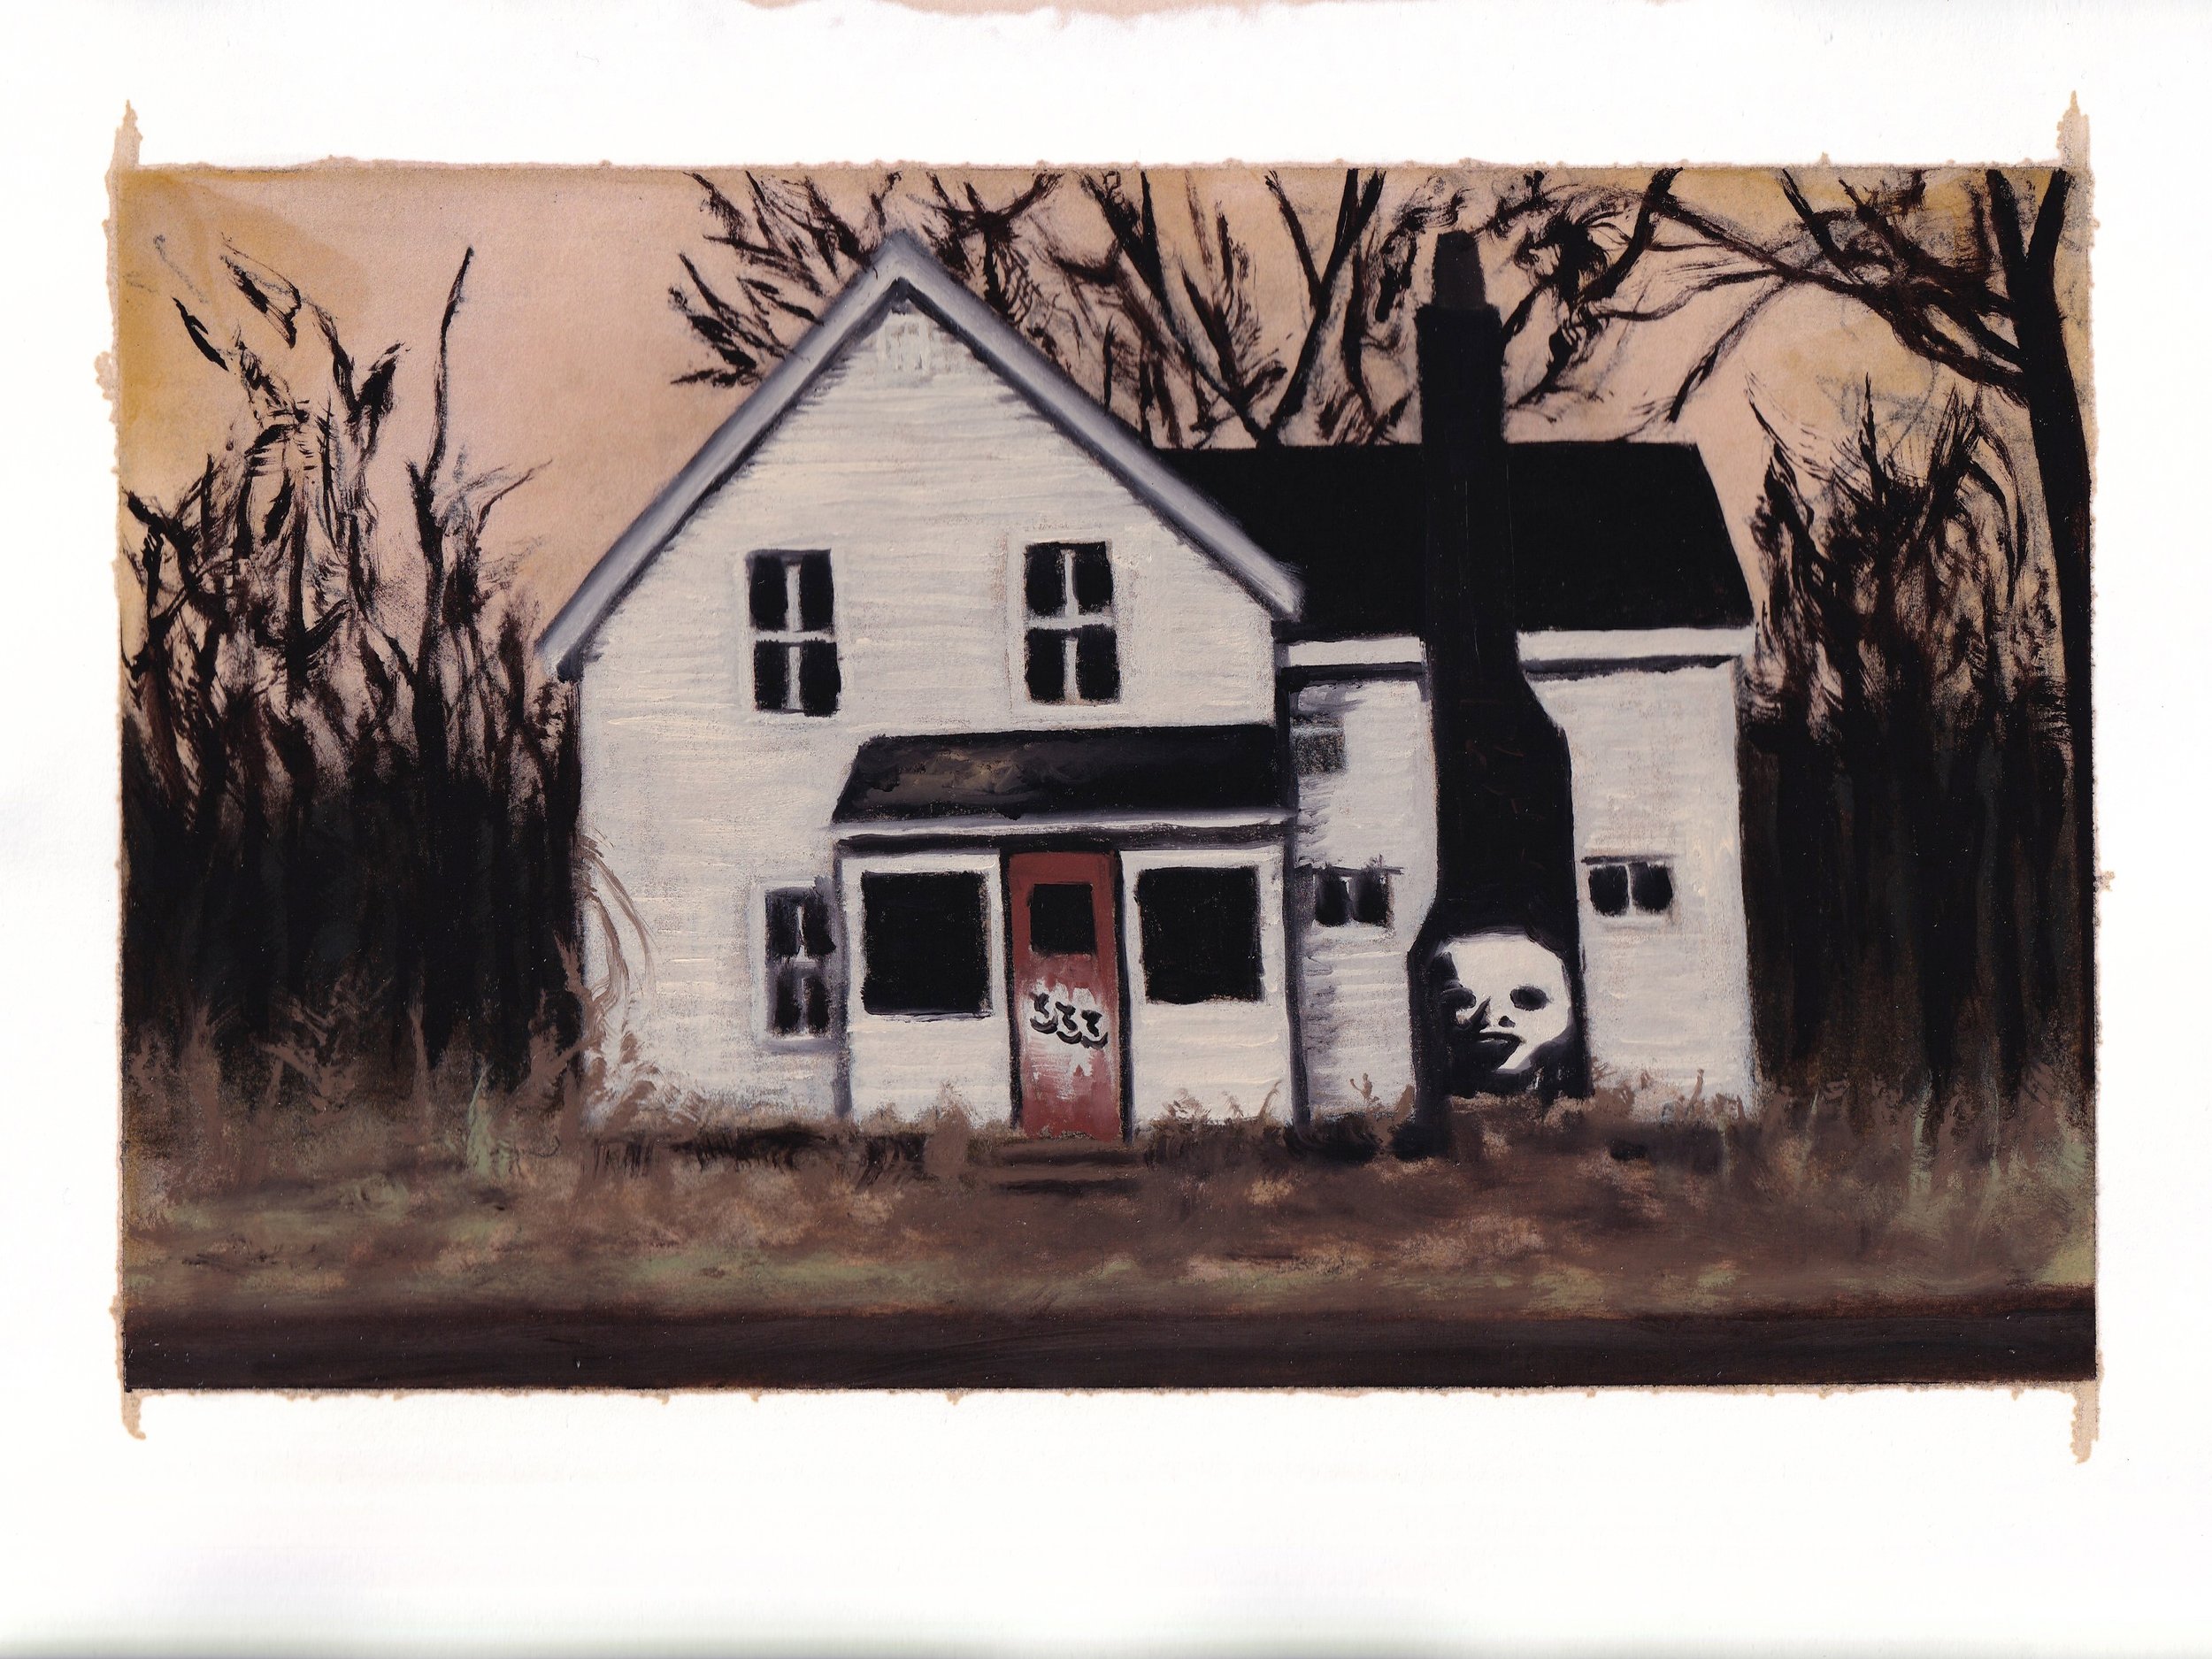  the great american foreclosure- 9” x 12” - 2021 - charcoal, amber shellac, and oil paint on paper 